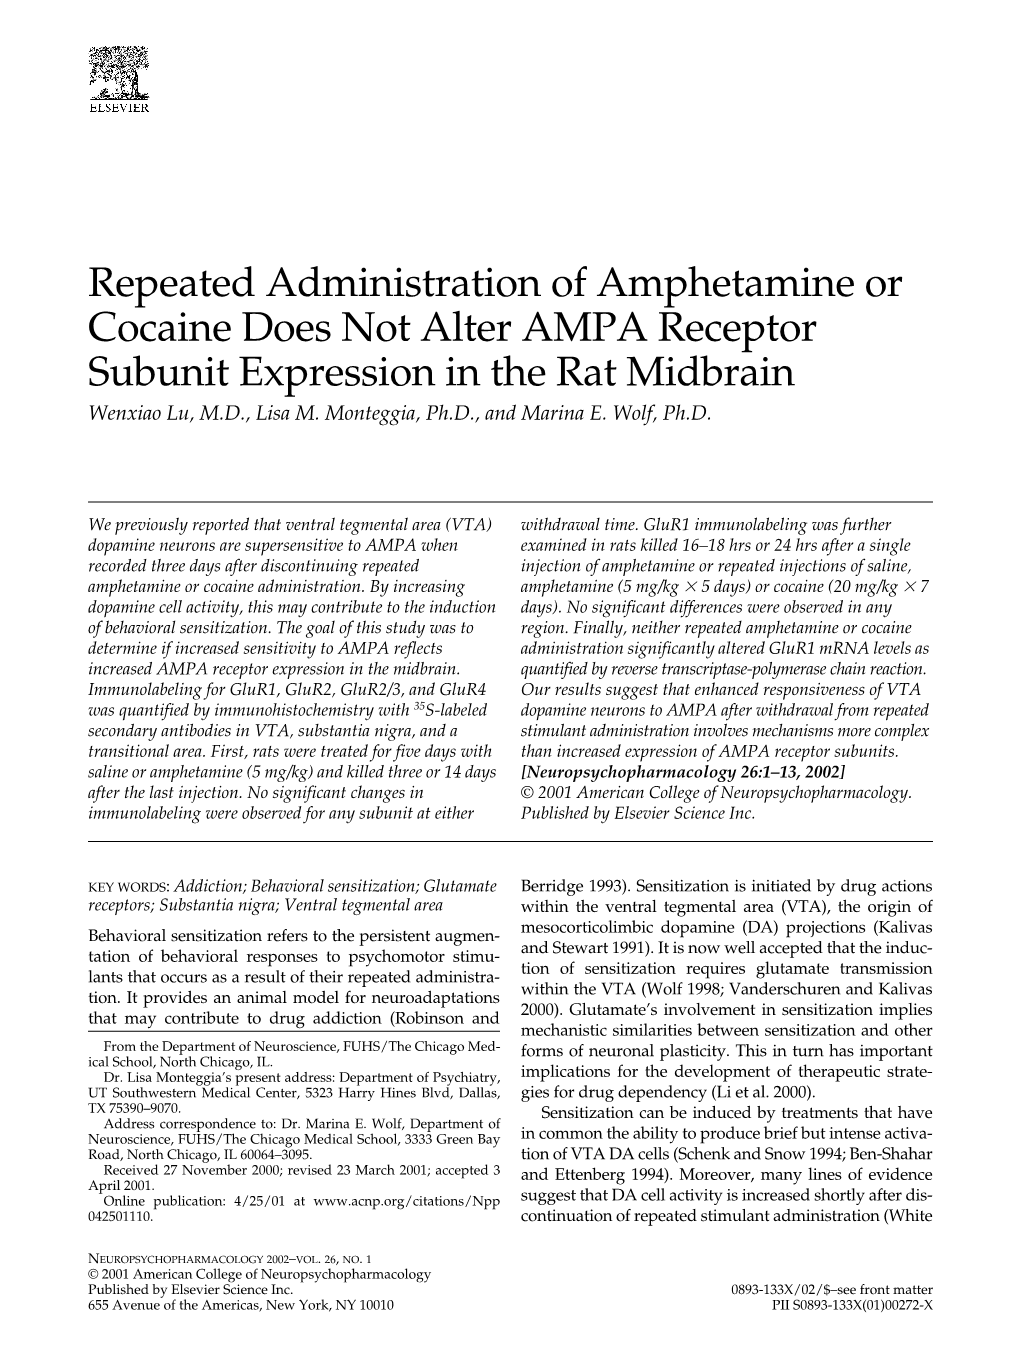 Repeated Administration of Amphetamine Or Cocaine Does Not Alter AMPA Receptor Subunit Expression in the Rat Midbrain Wenxiao Lu, M.D., Lisa M